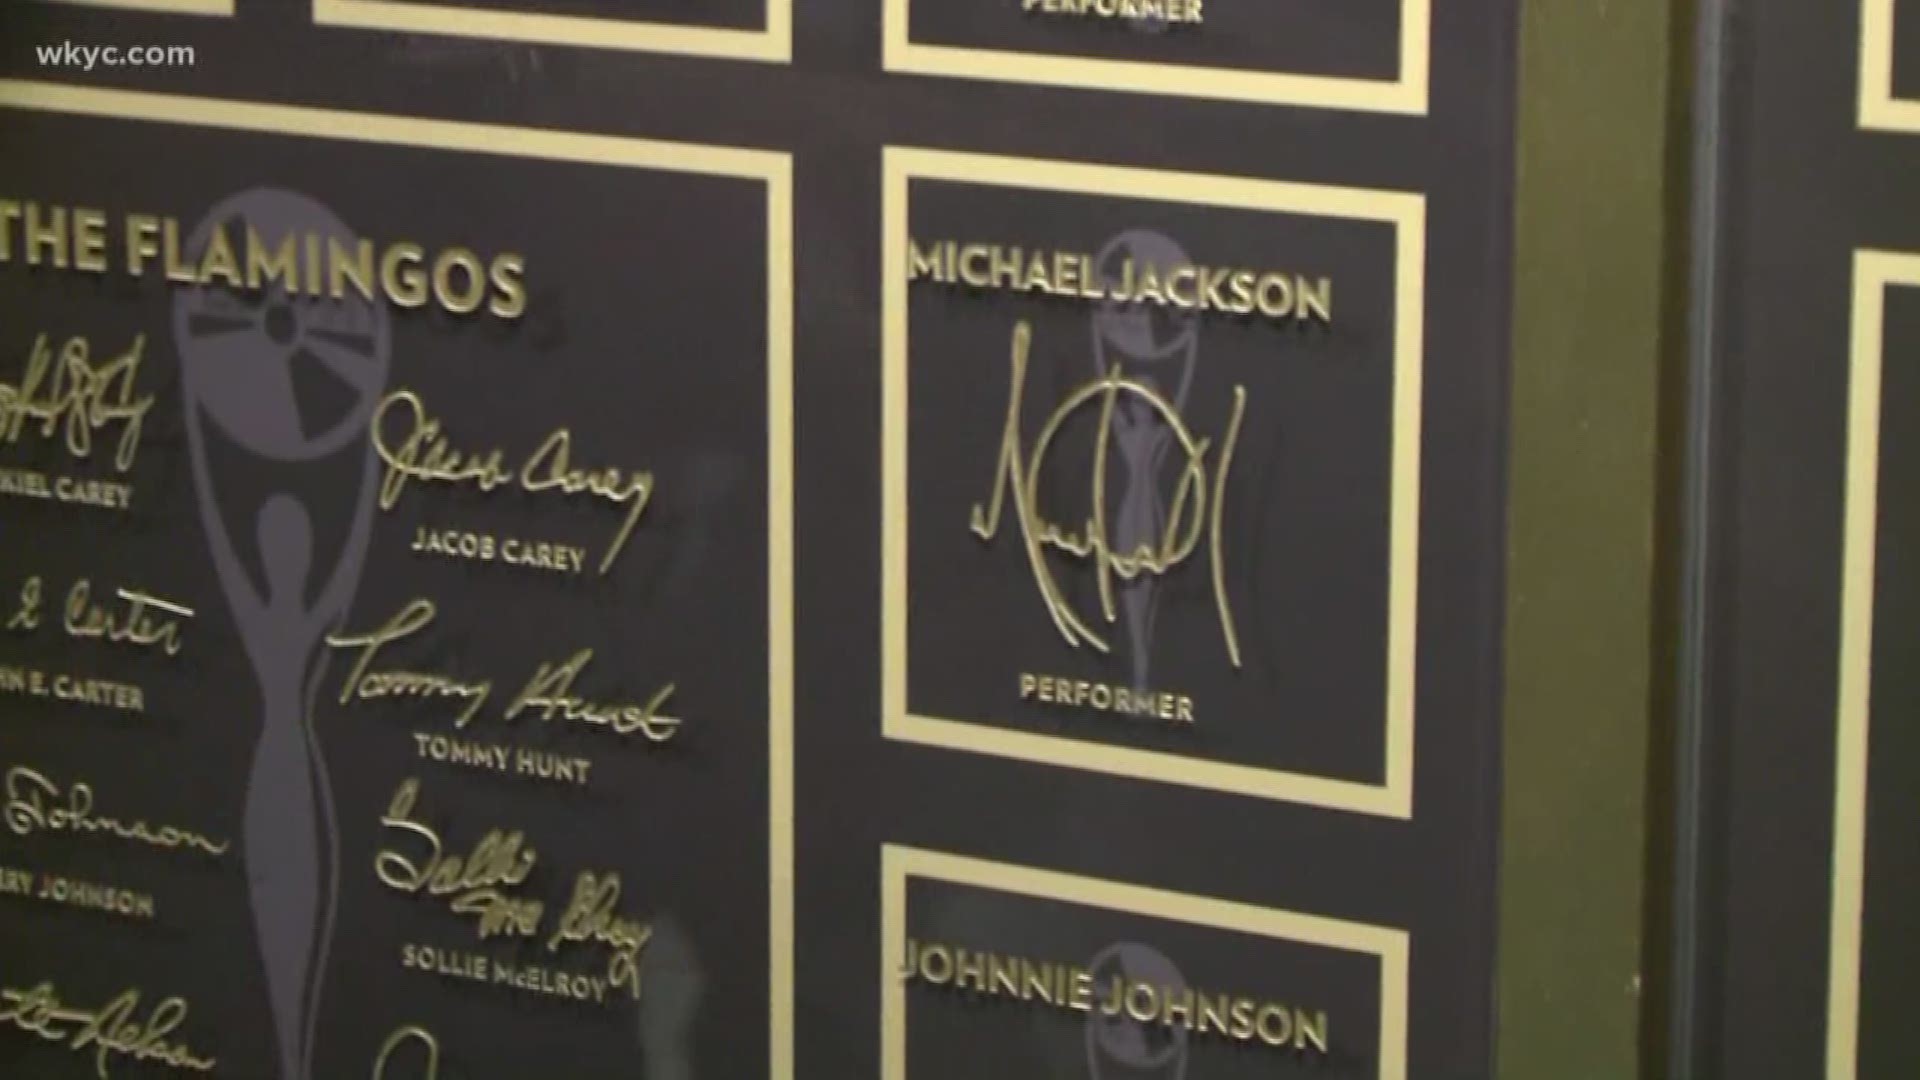 Aug. 29, 2018: Today would have been Michael Jackson's 60th birthday, so we visit the Rock and Roll Hall of Fame in Cleveland to see his induction signatures.